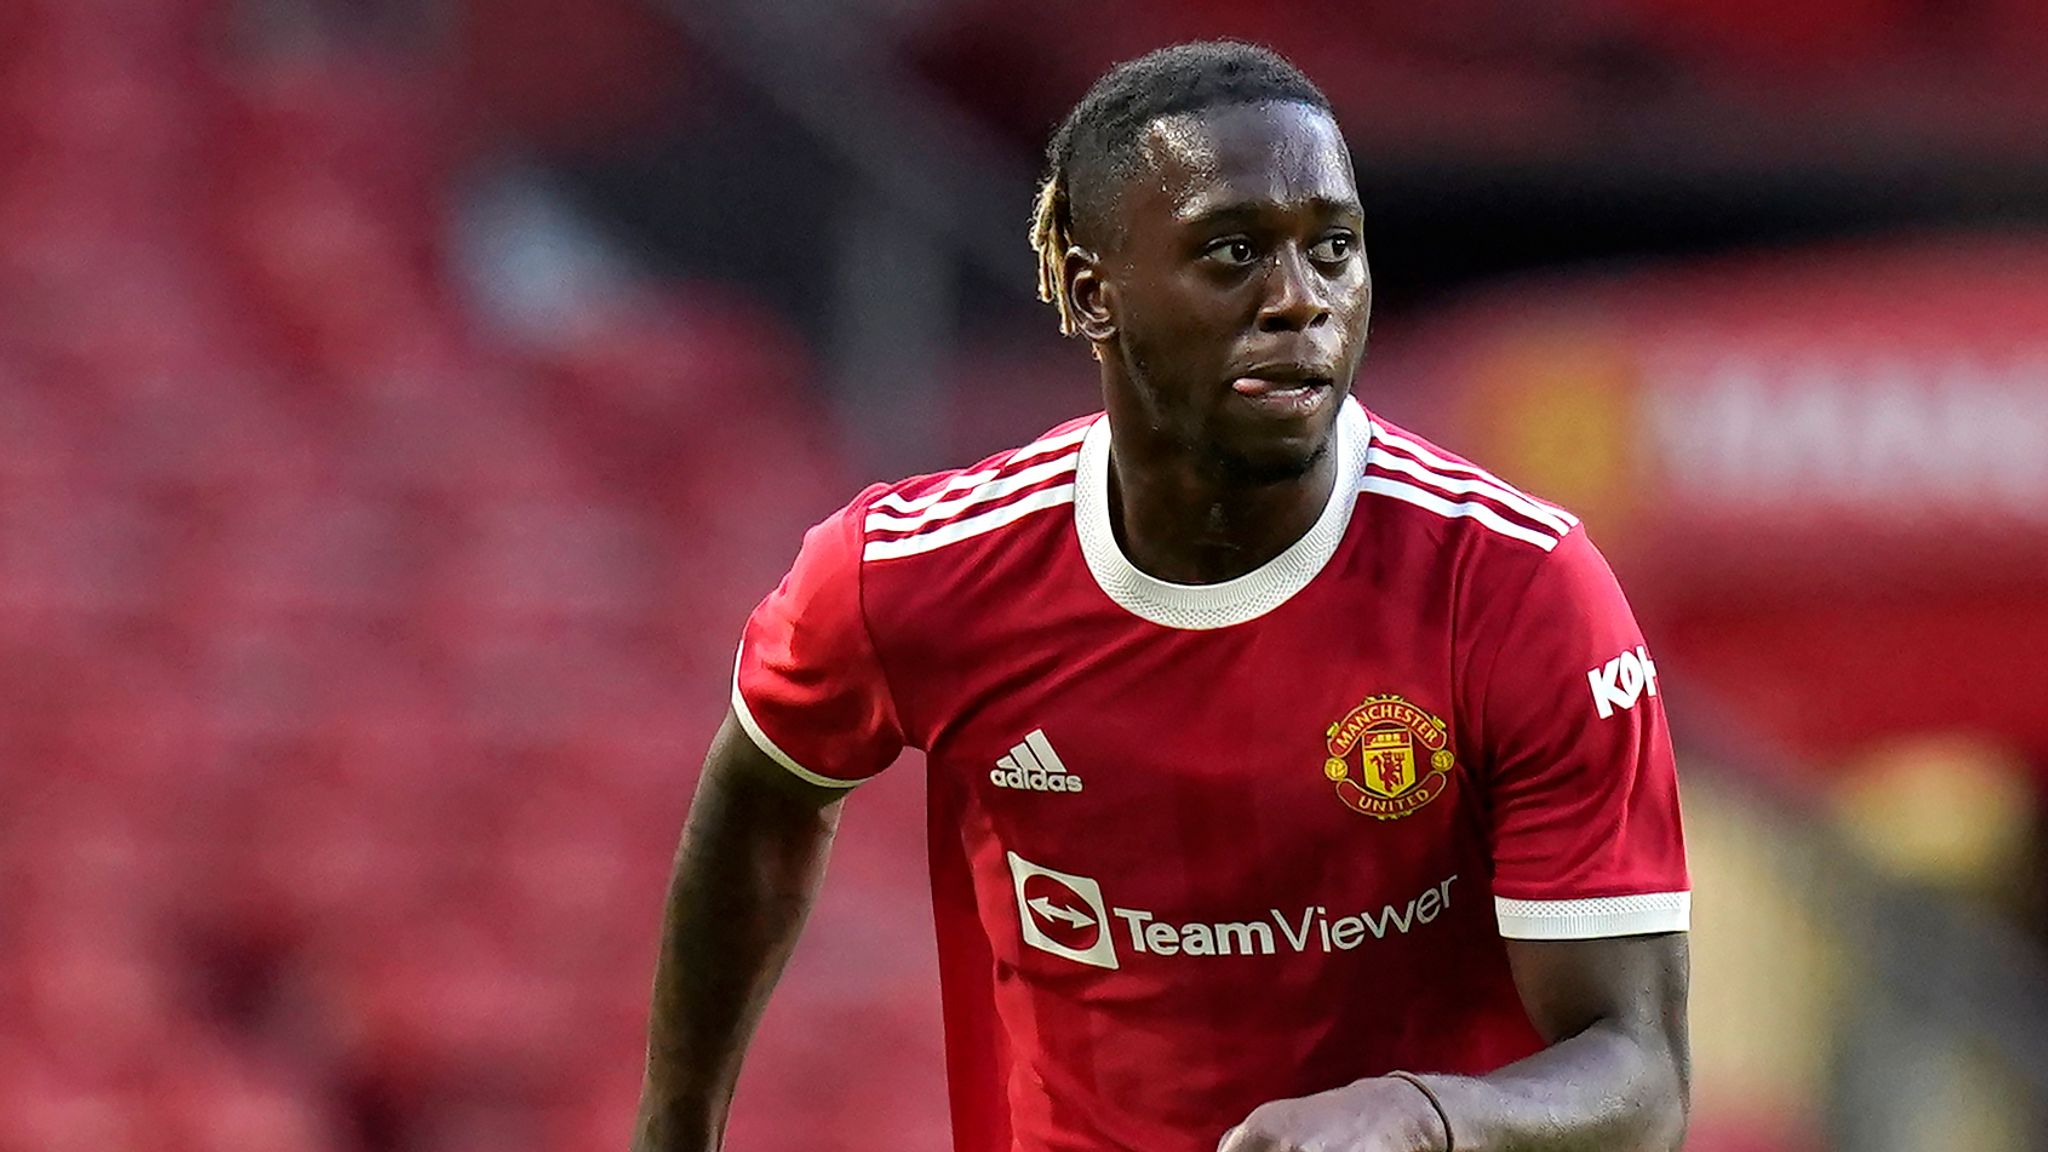 Champions League: Man Utd win appeal over Wan-Bissaka's ban